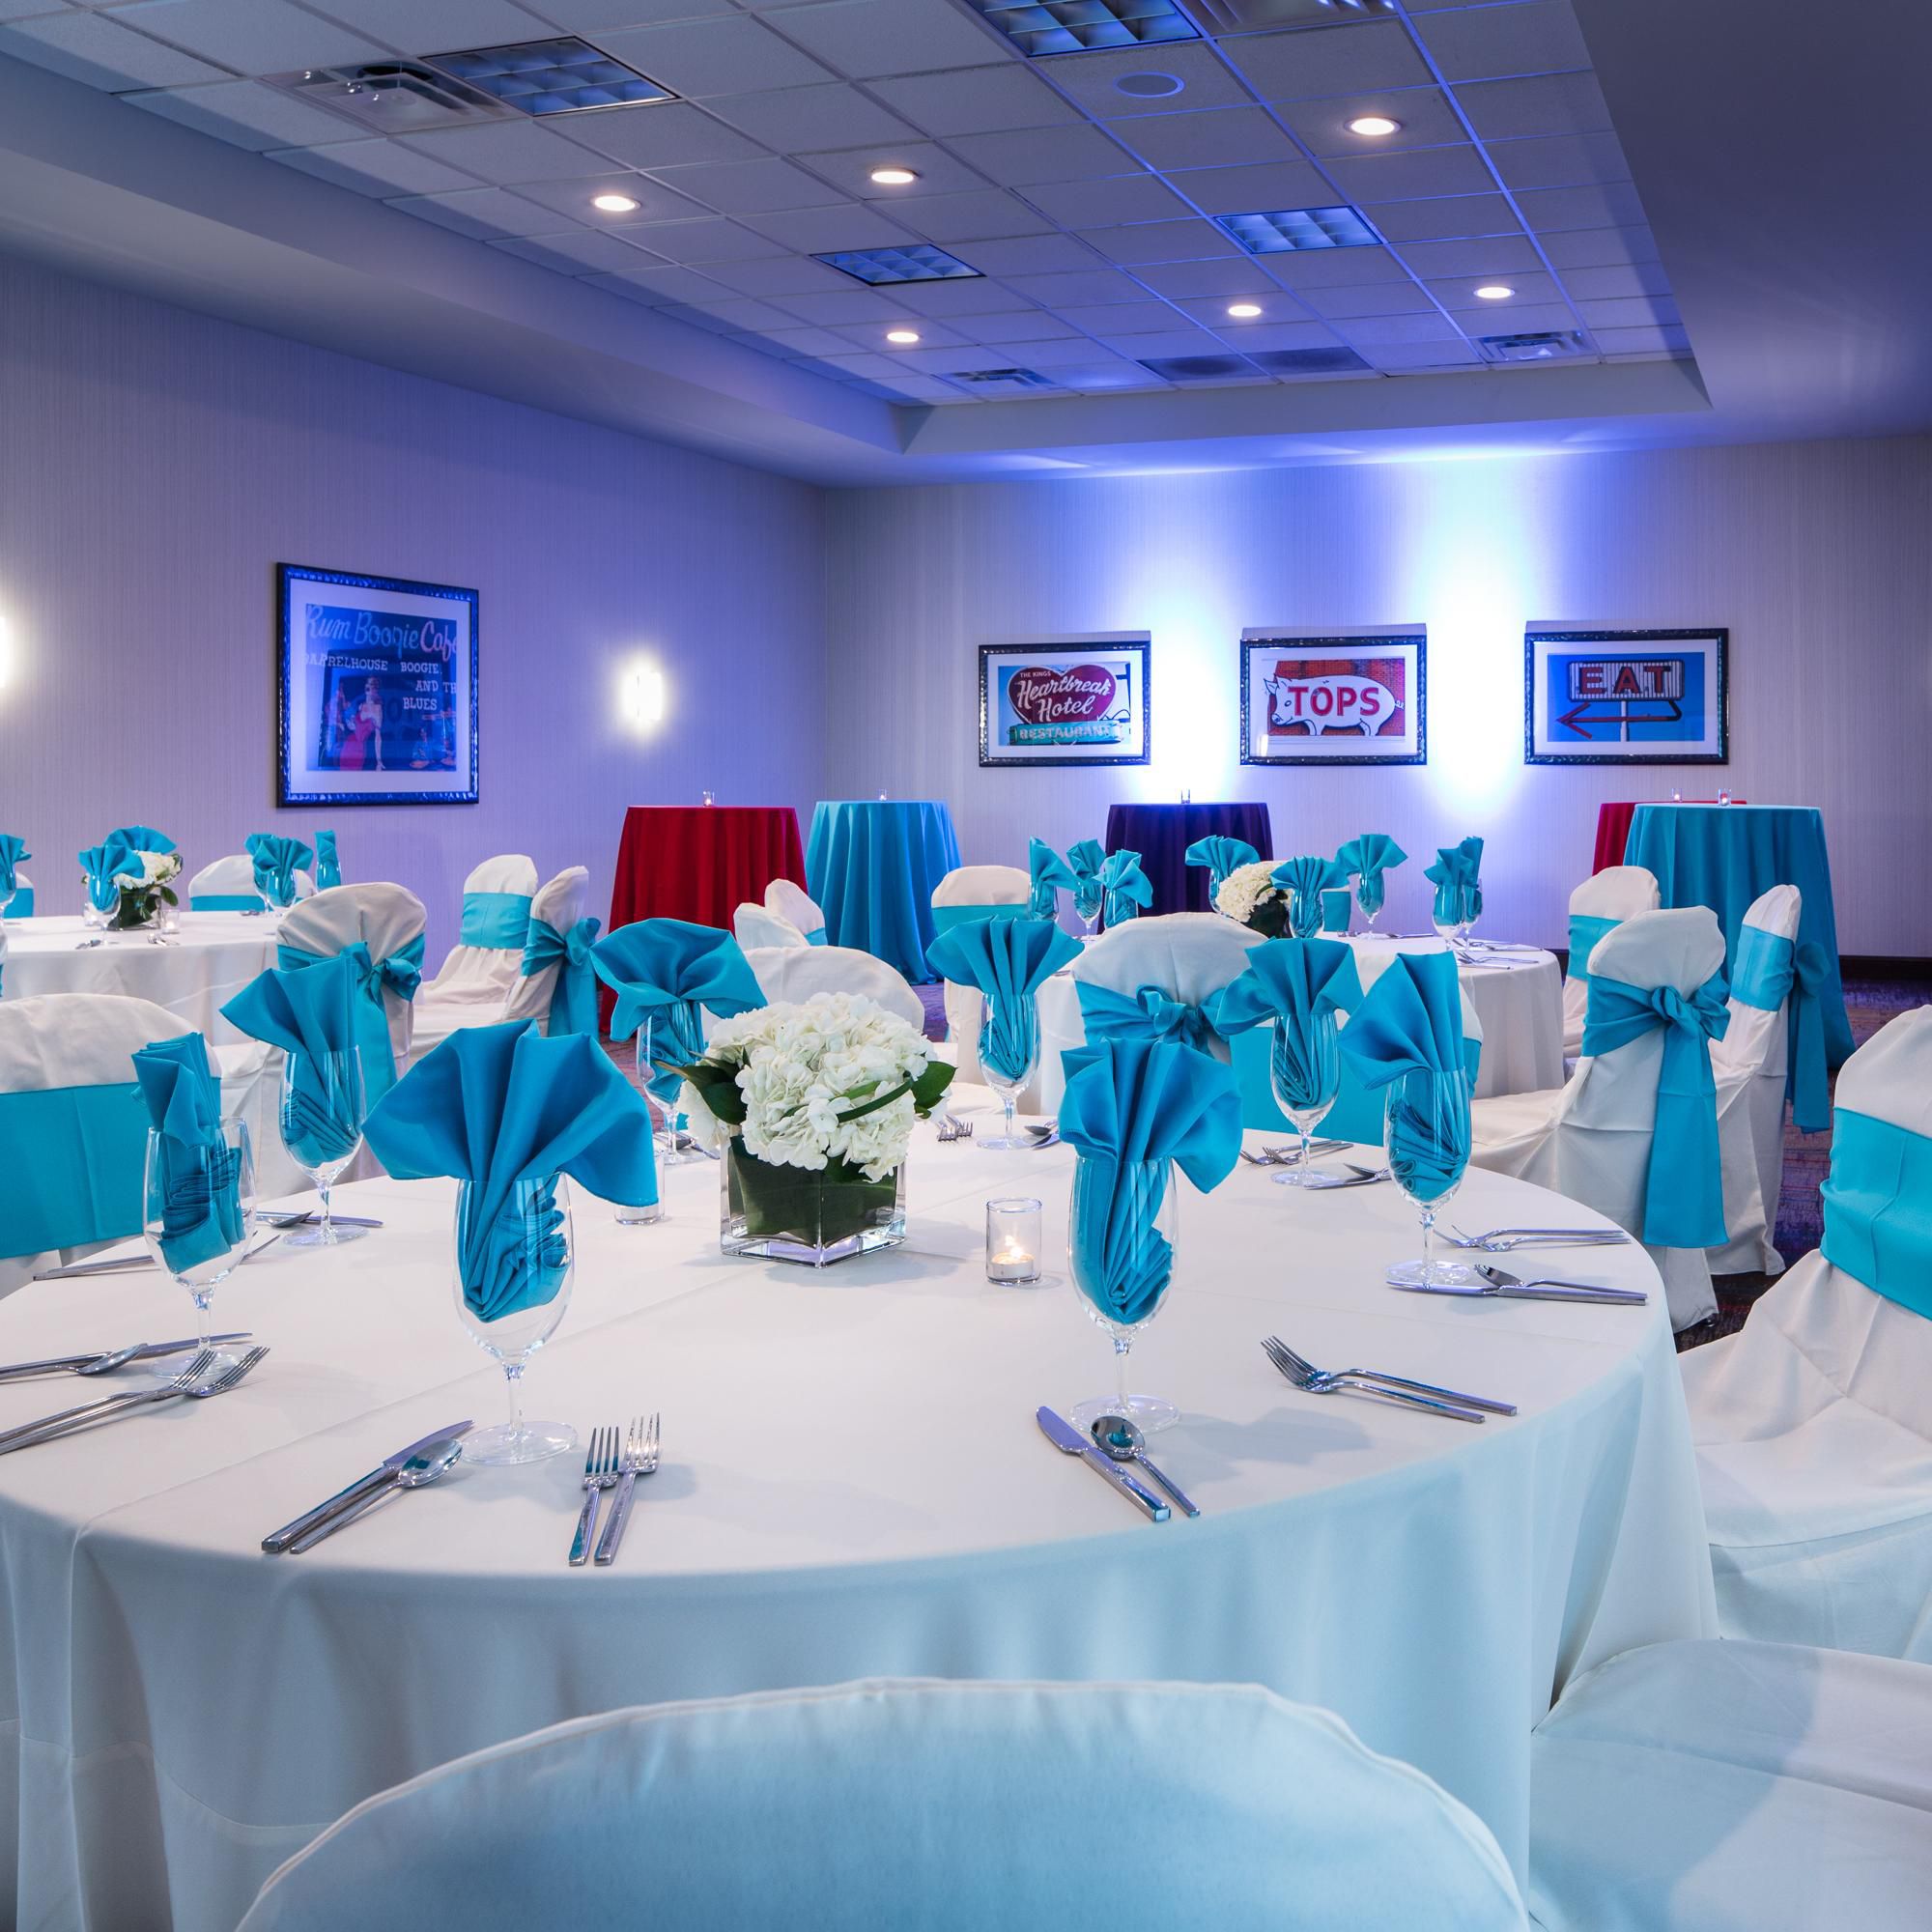 Looking to host your event in Memphis? Contact our hotel today!